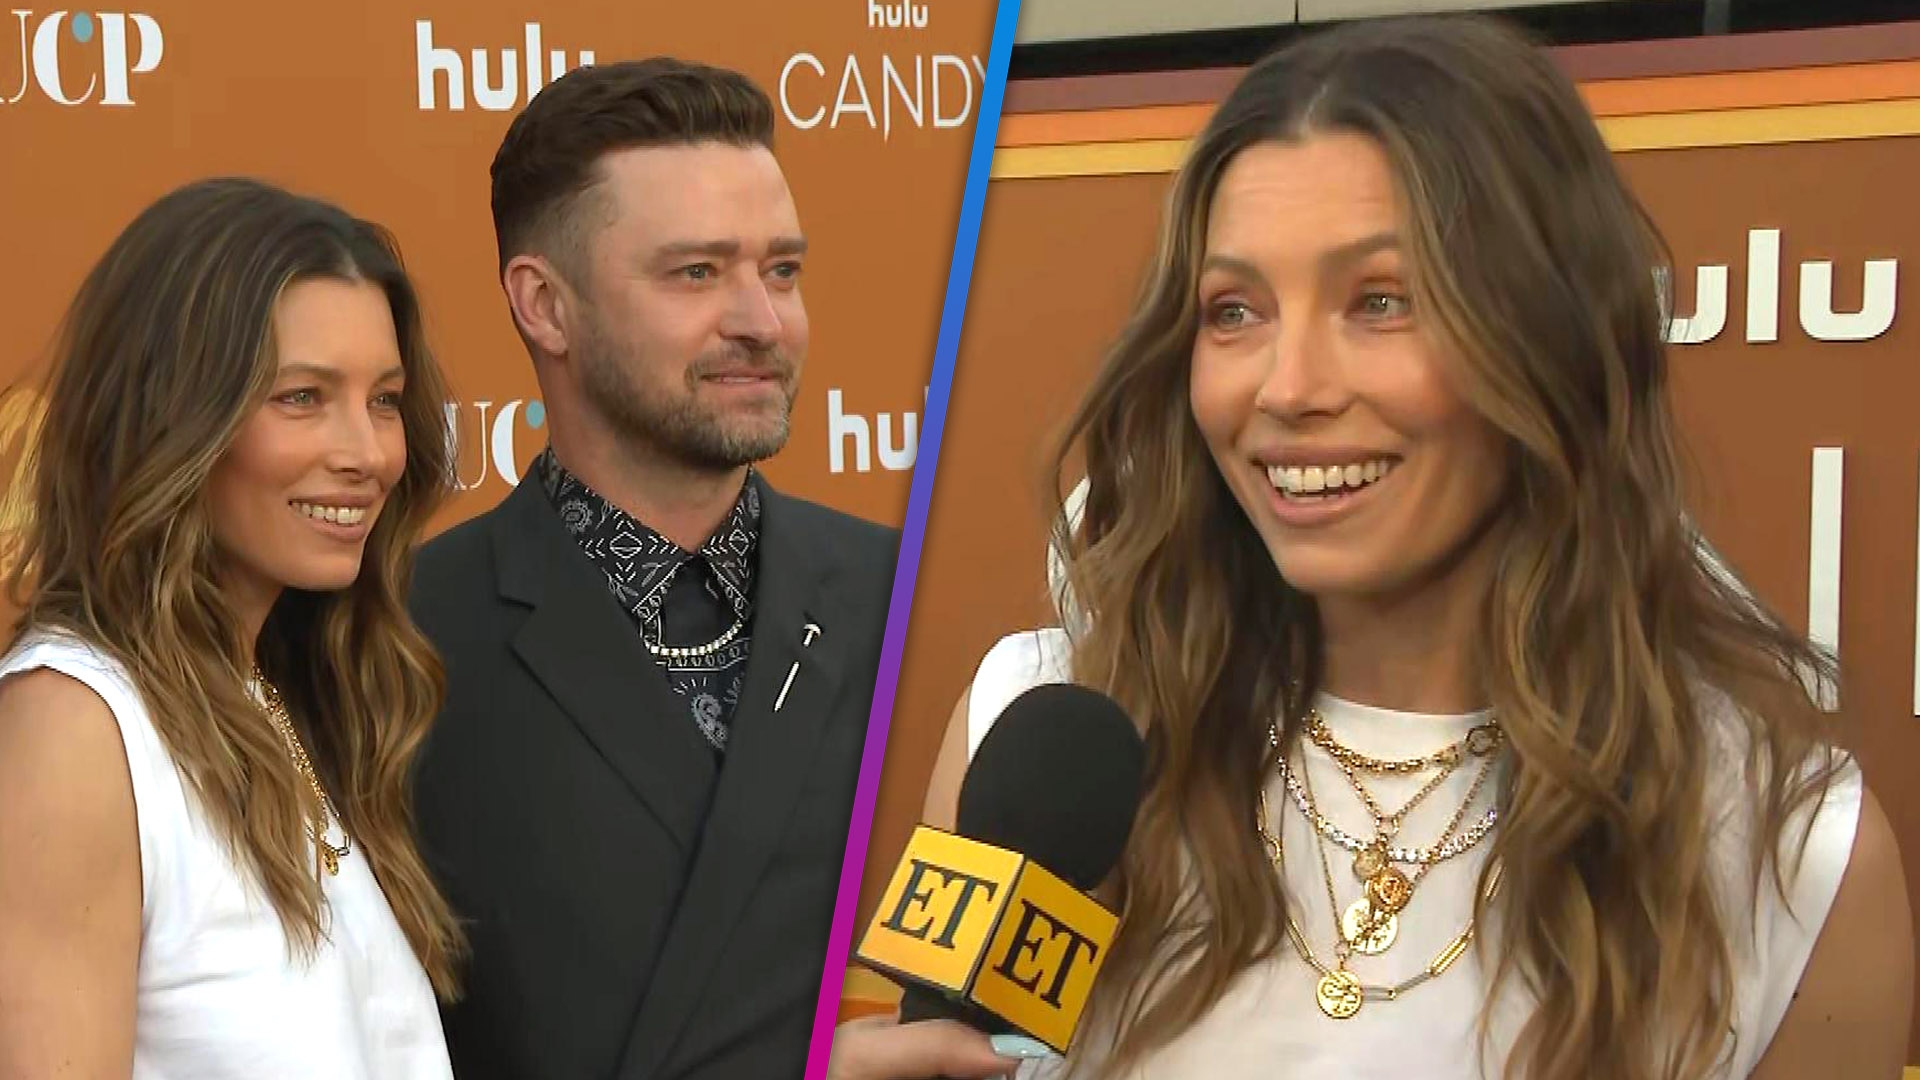 How many kids do Justin Timberlake and Jessica Biel have? – The